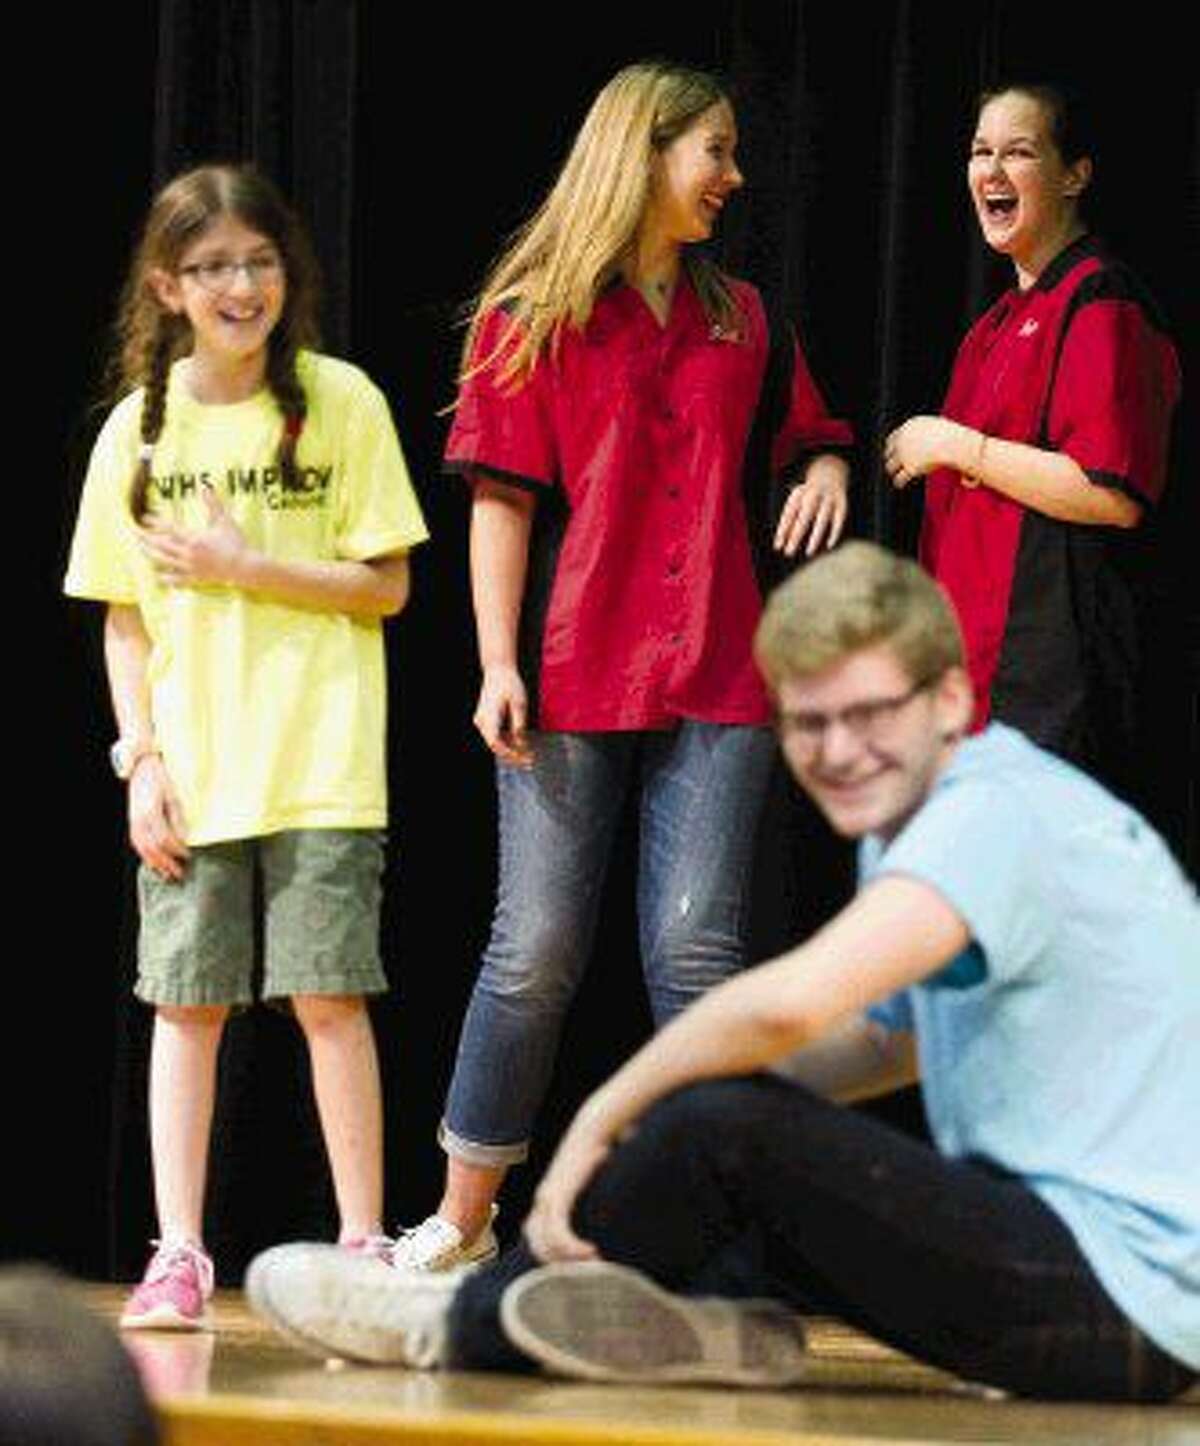 The Woodlands High School Improv Troupe members Katerina Meyerl, center, and Brenna Lelicah laugh as Mitchell Intermediate School students Rotem Rics and Jason Leach go through a skit at Mitchell Intermediate School Wednesday.